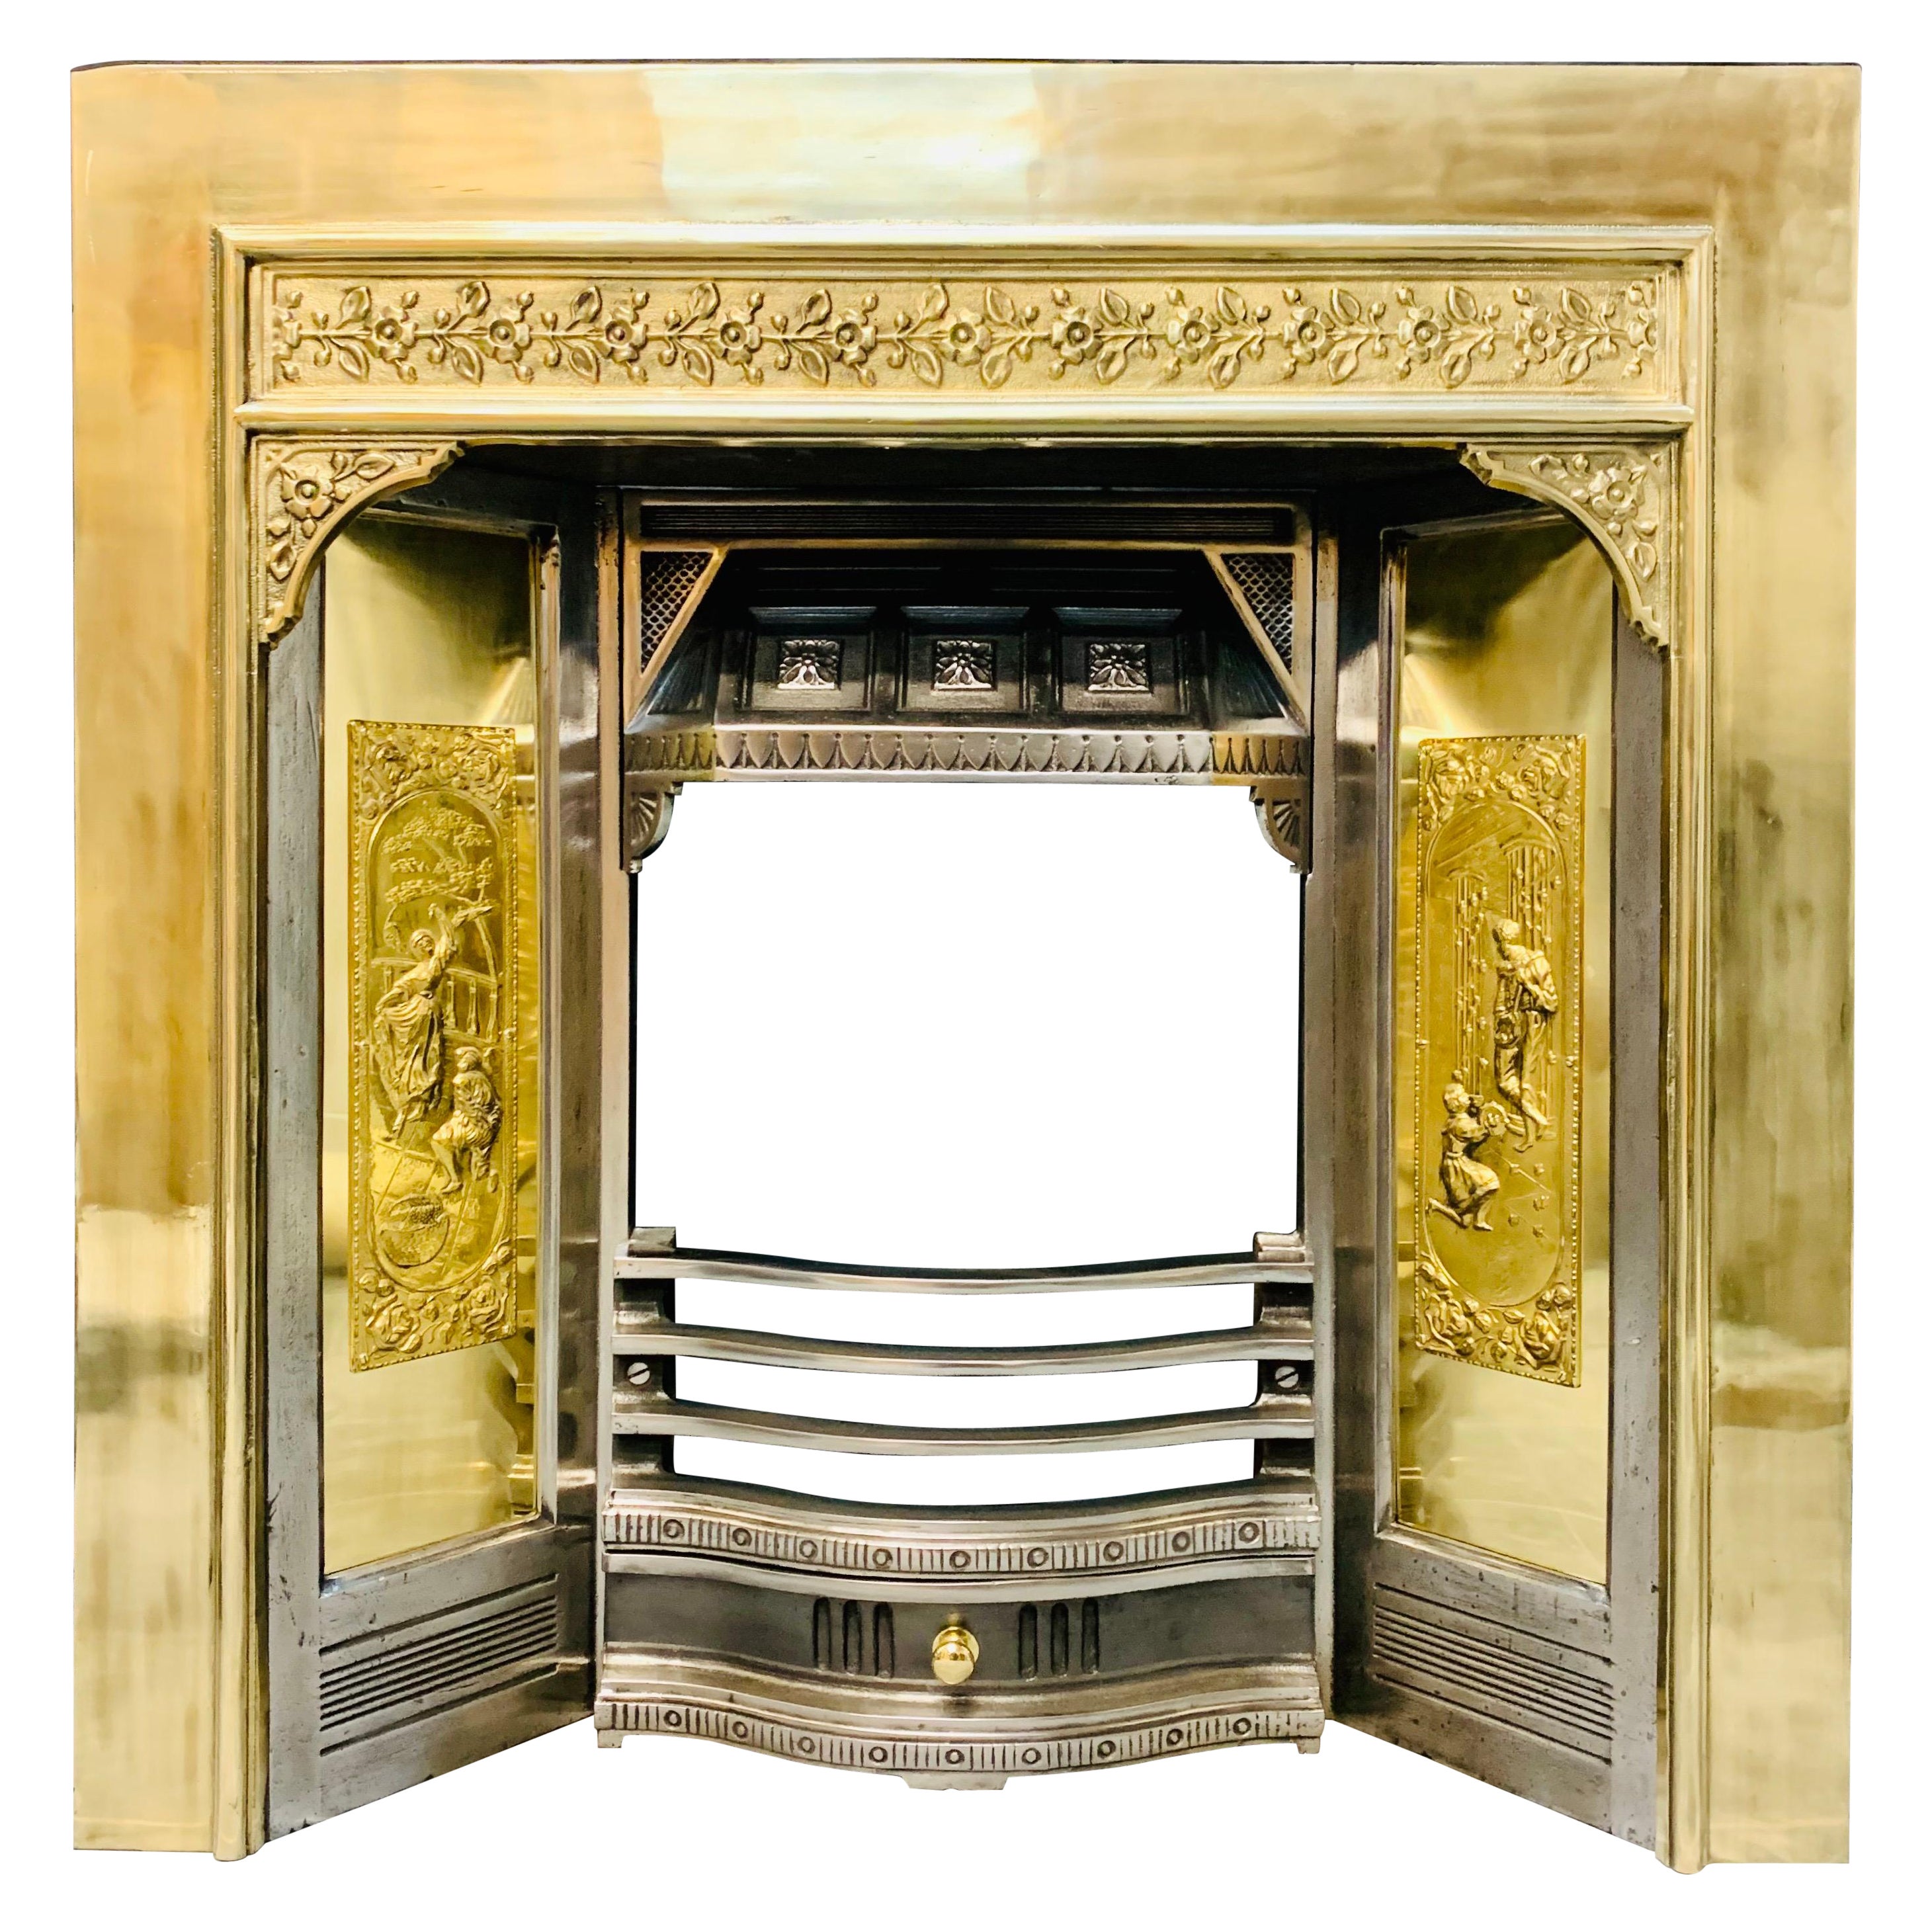 19th Century Manner Polished Brass & Steel Fireplace Insert For Sale